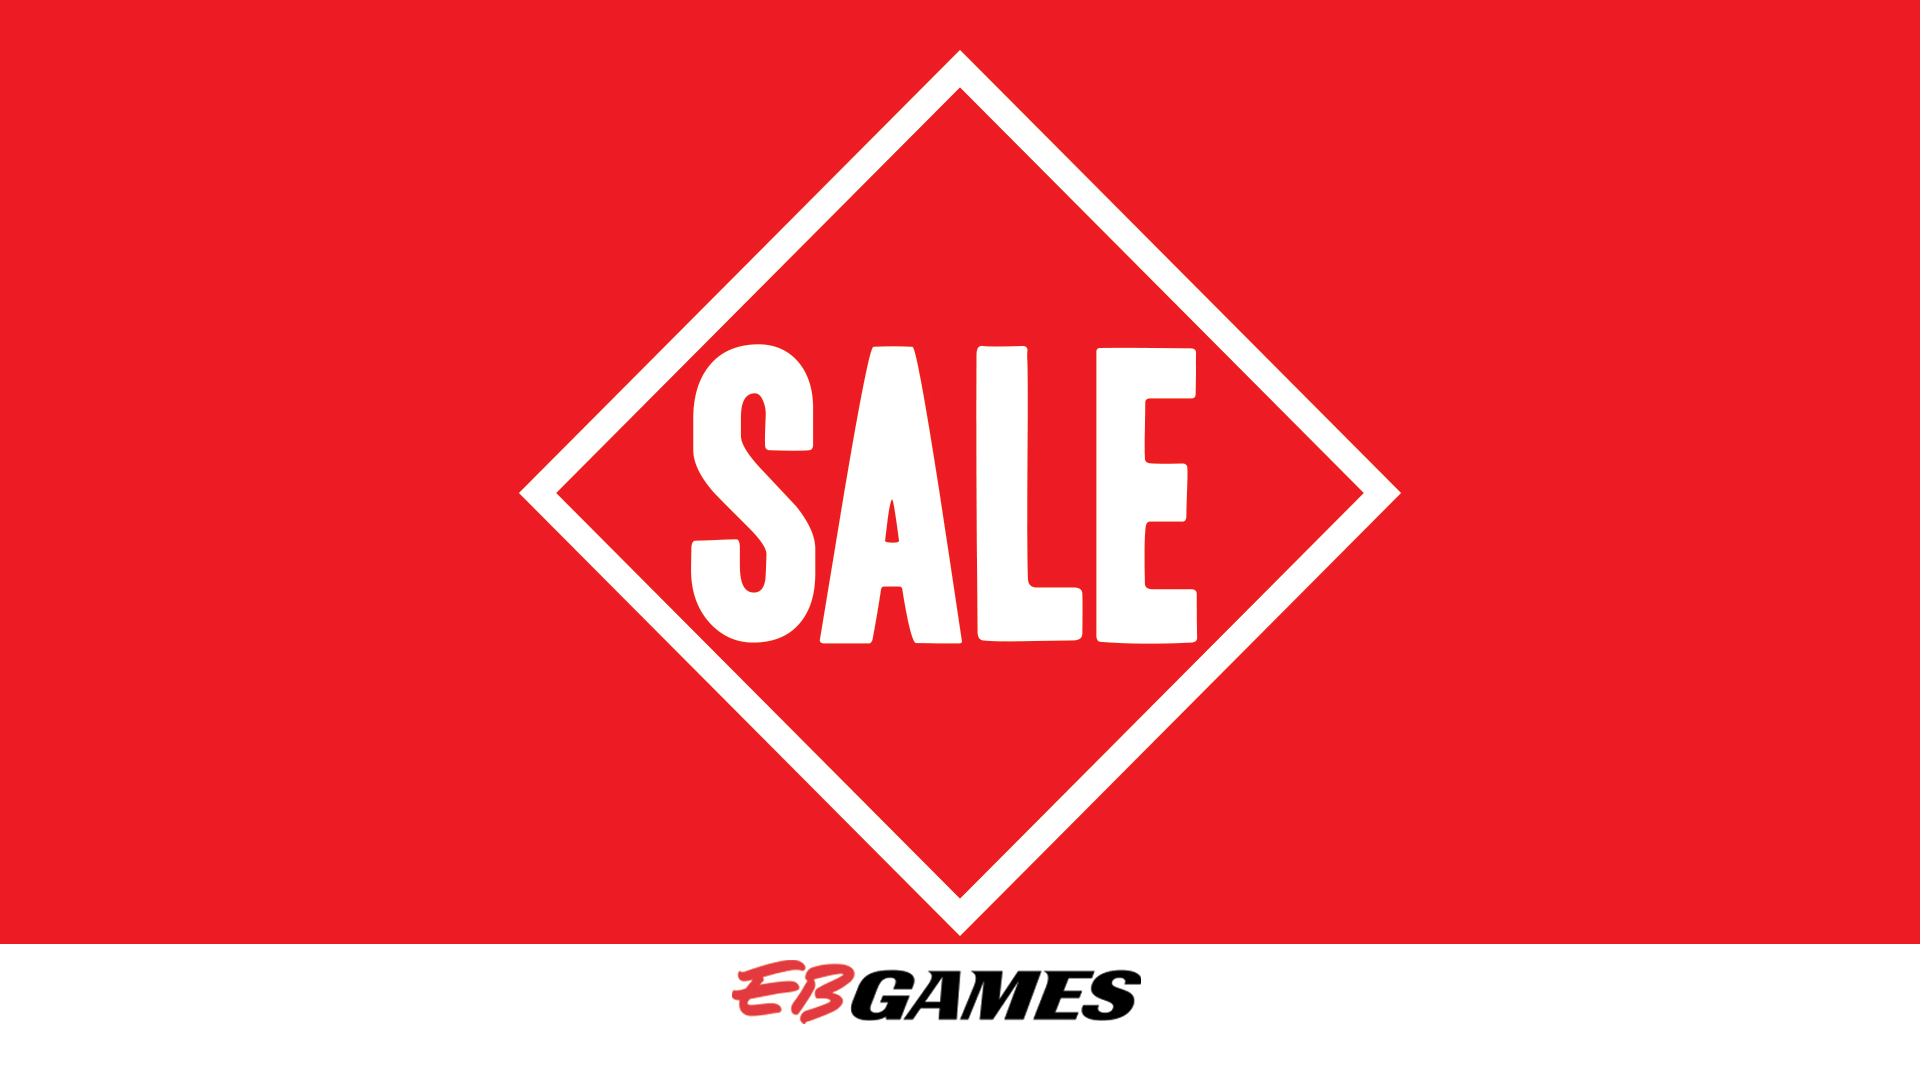 Mid year SALE on now at EB Games